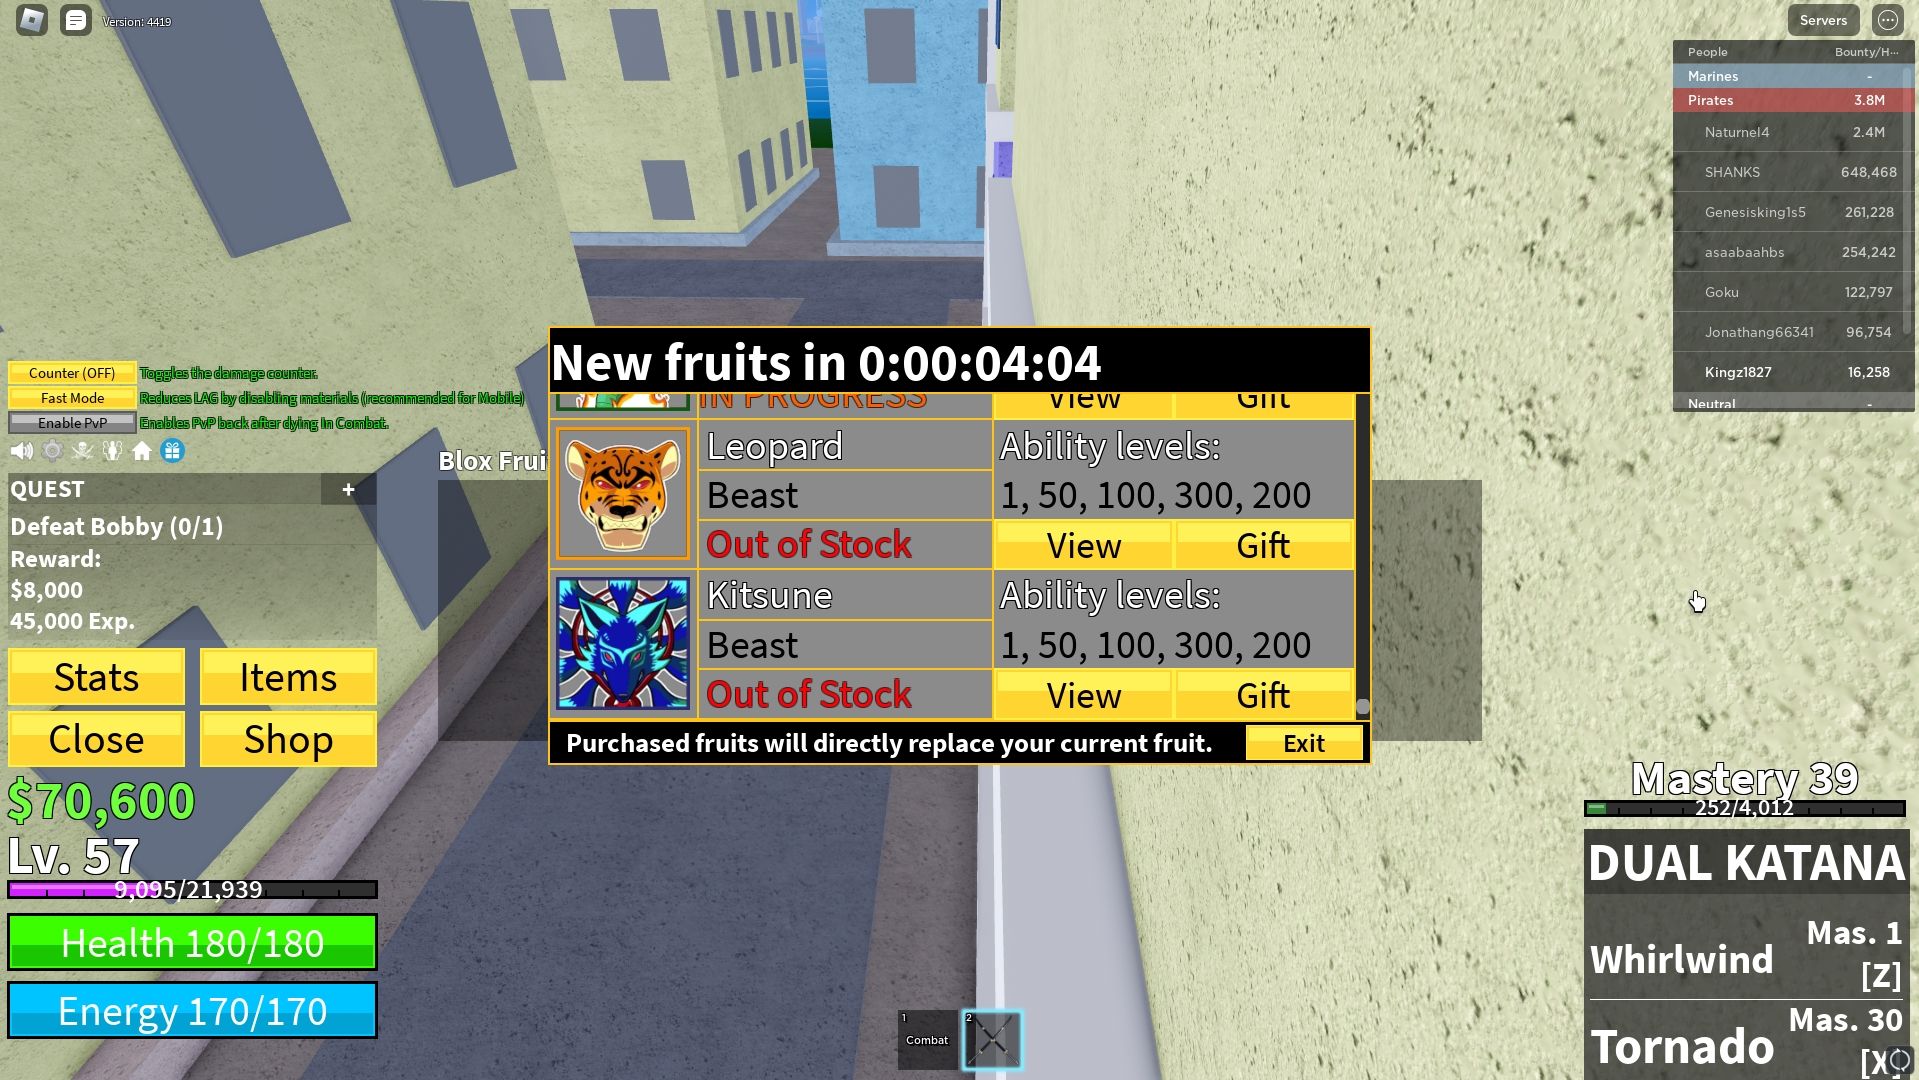 Waiting for Kitsune to restock from the Blox Fruit Dealer in Roblox